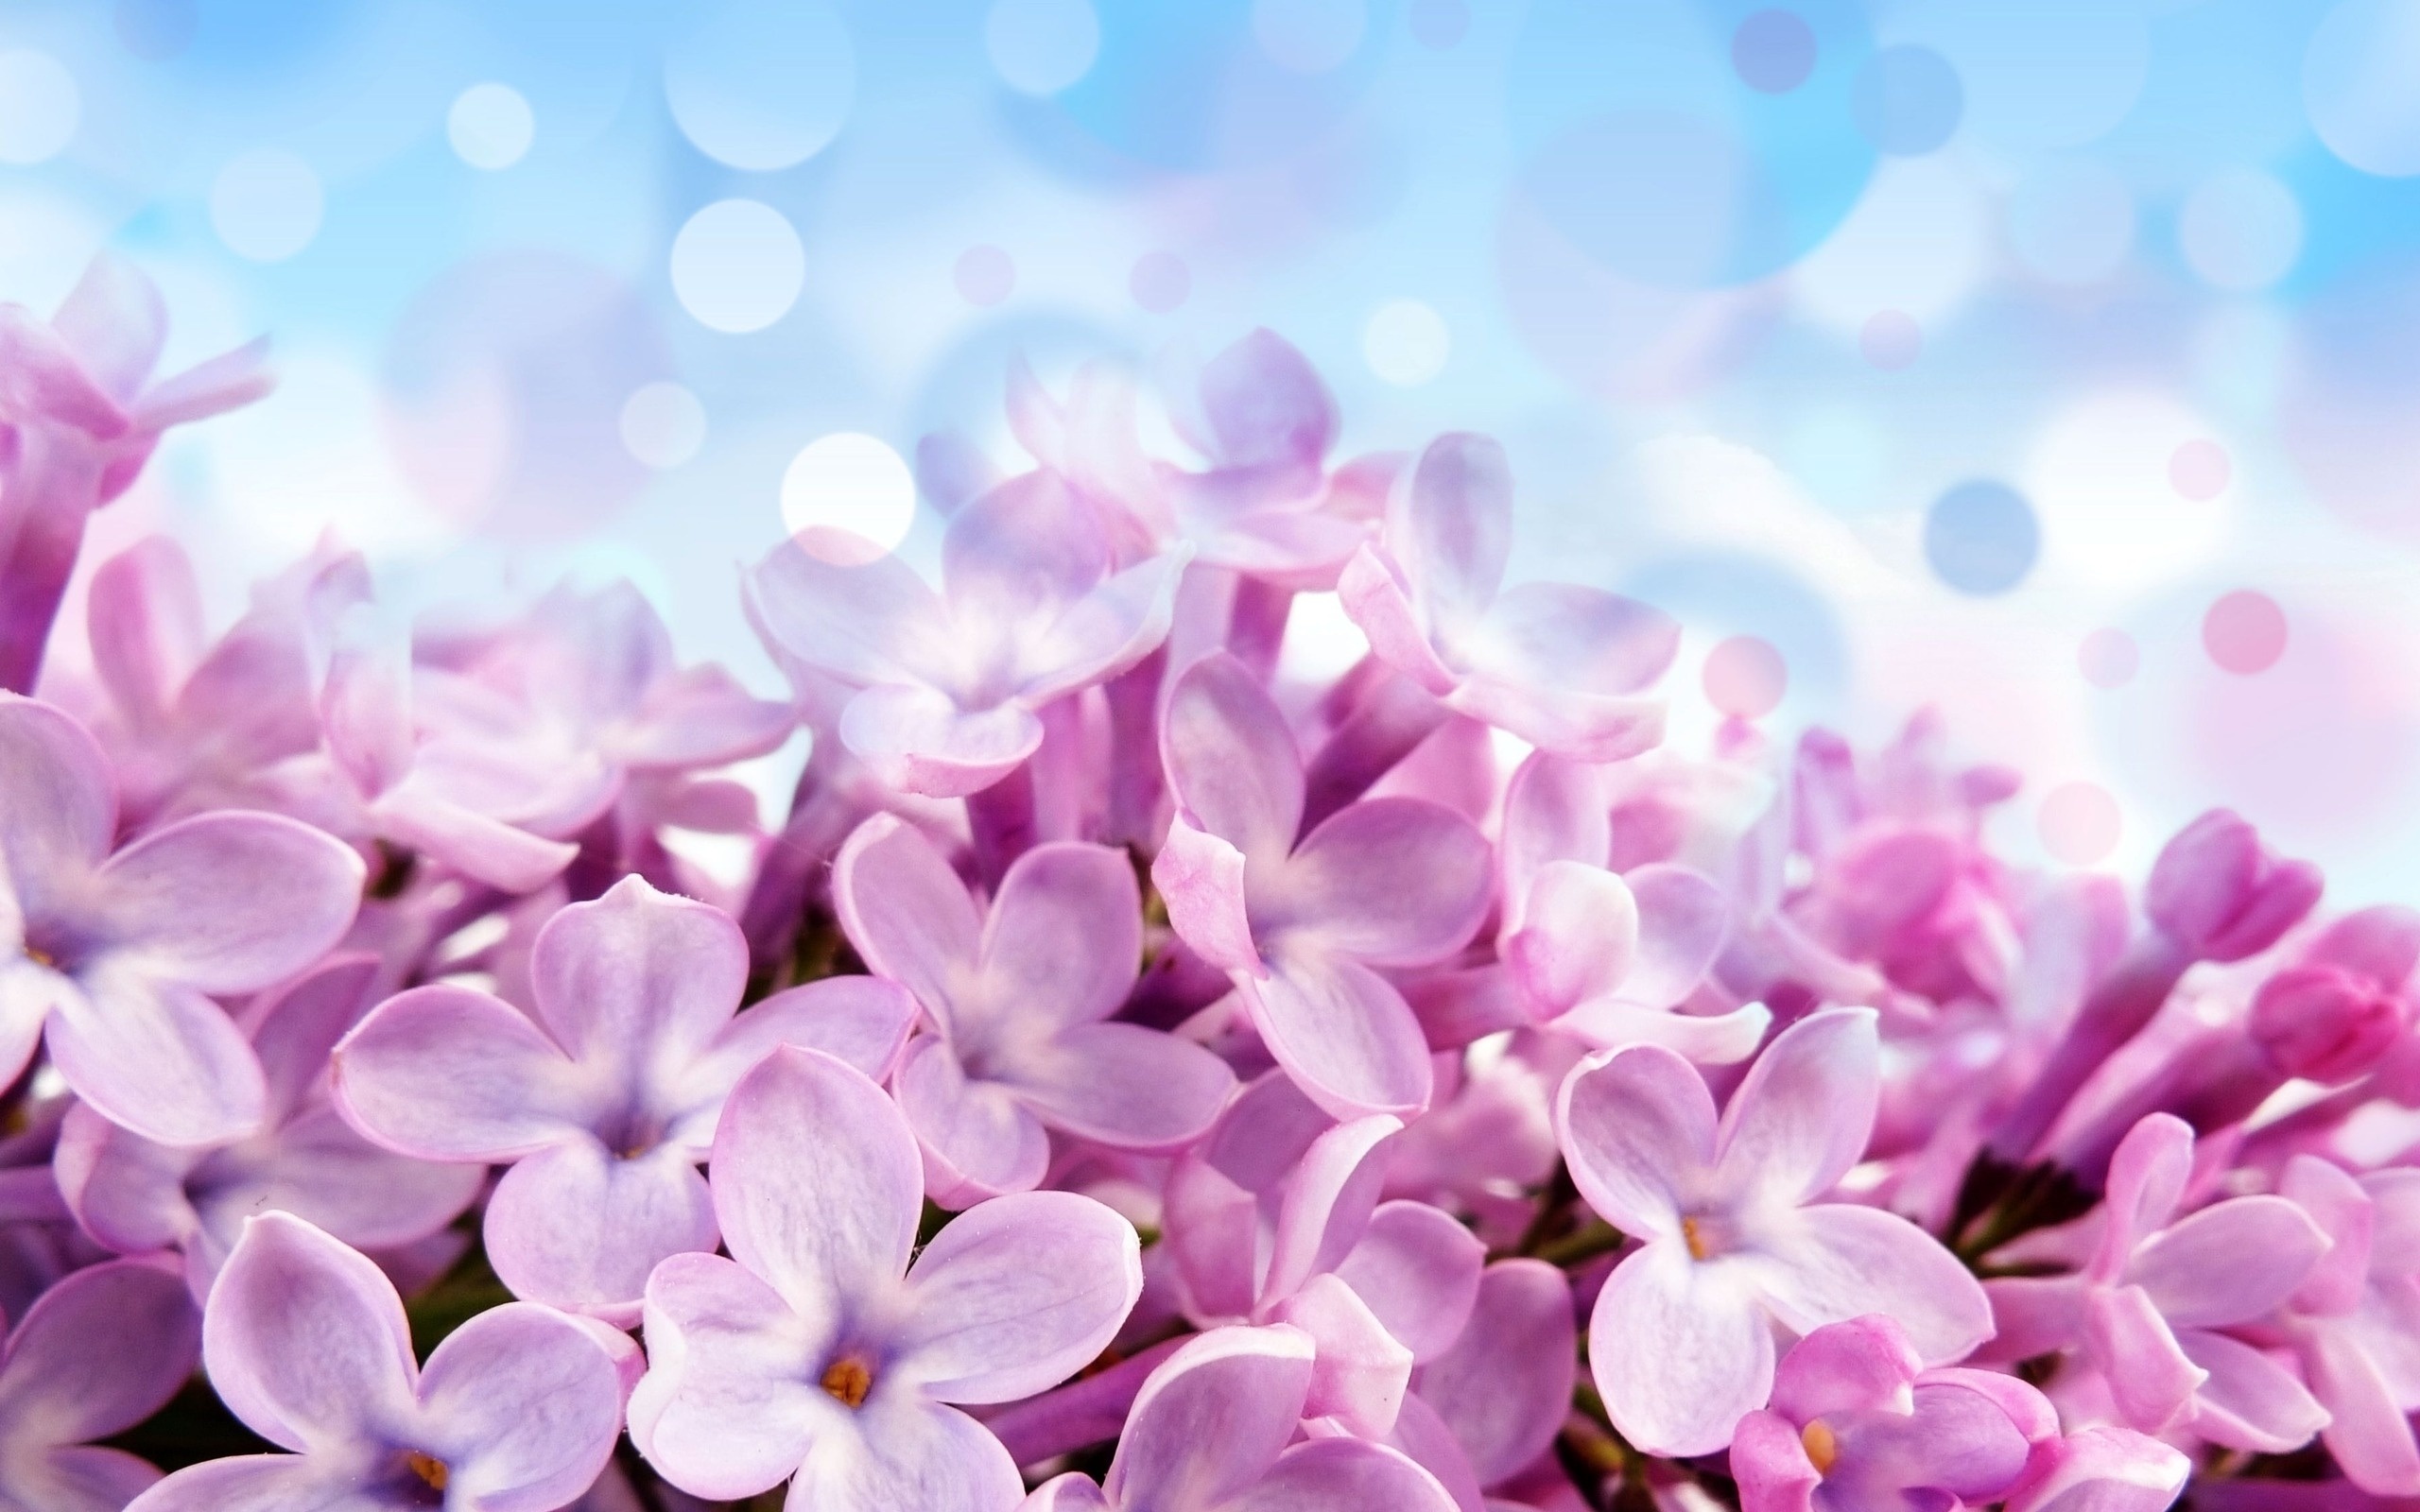 this flower wallpaper can be downloaded as a 1280x1024 wallpaper 2560x1600